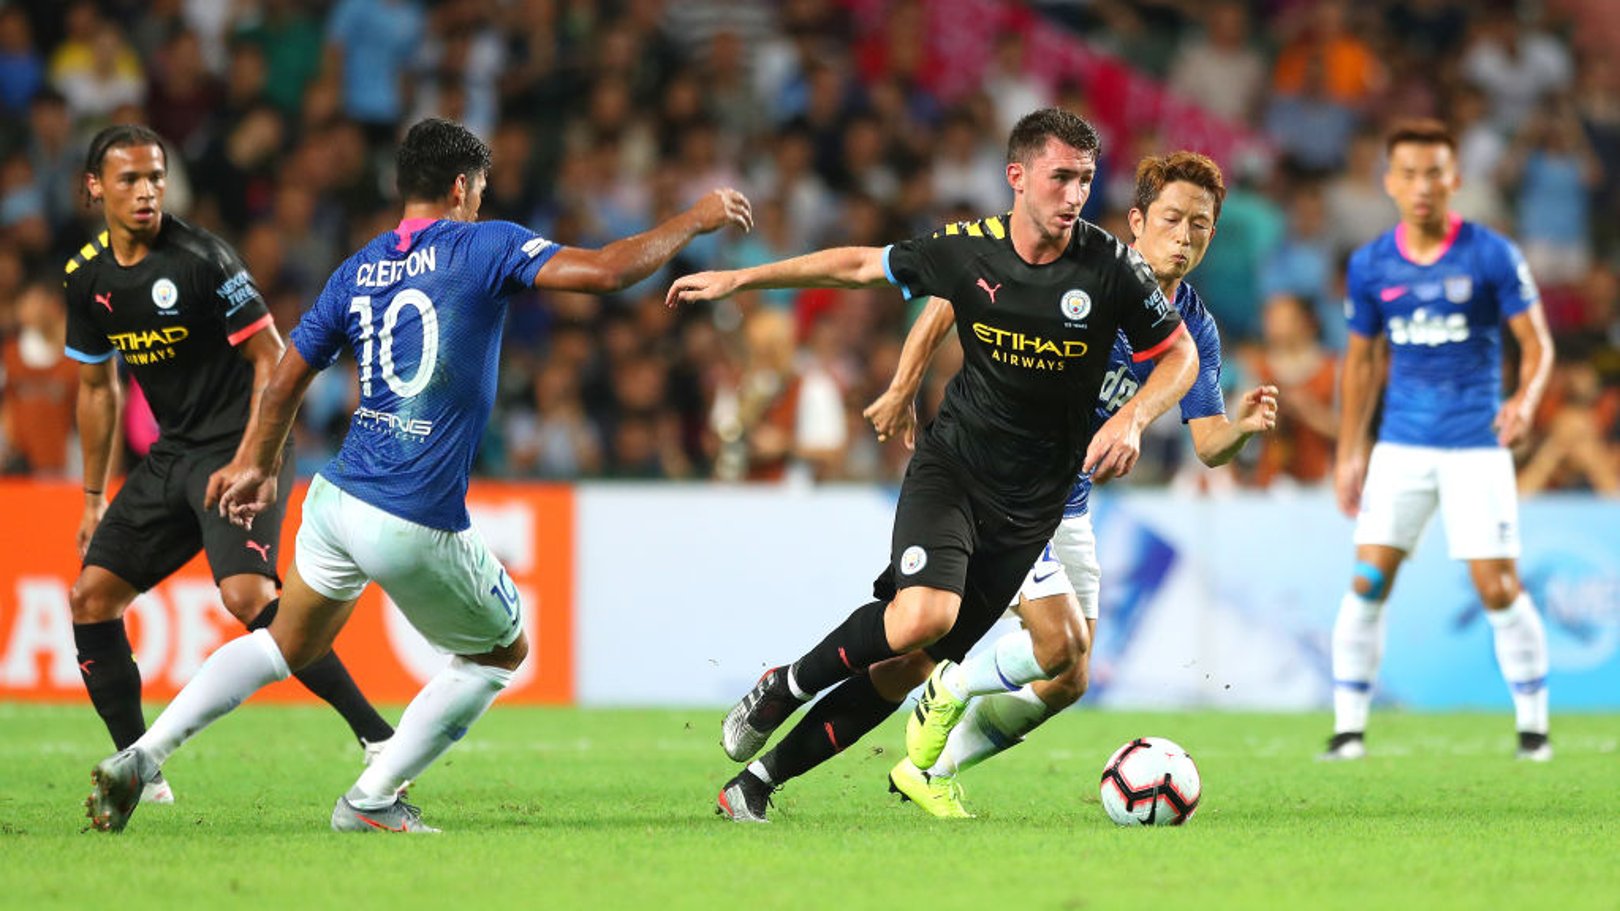 SOLID: Aymeric Laporte started in defence alongside John Stones for the second consecutive game